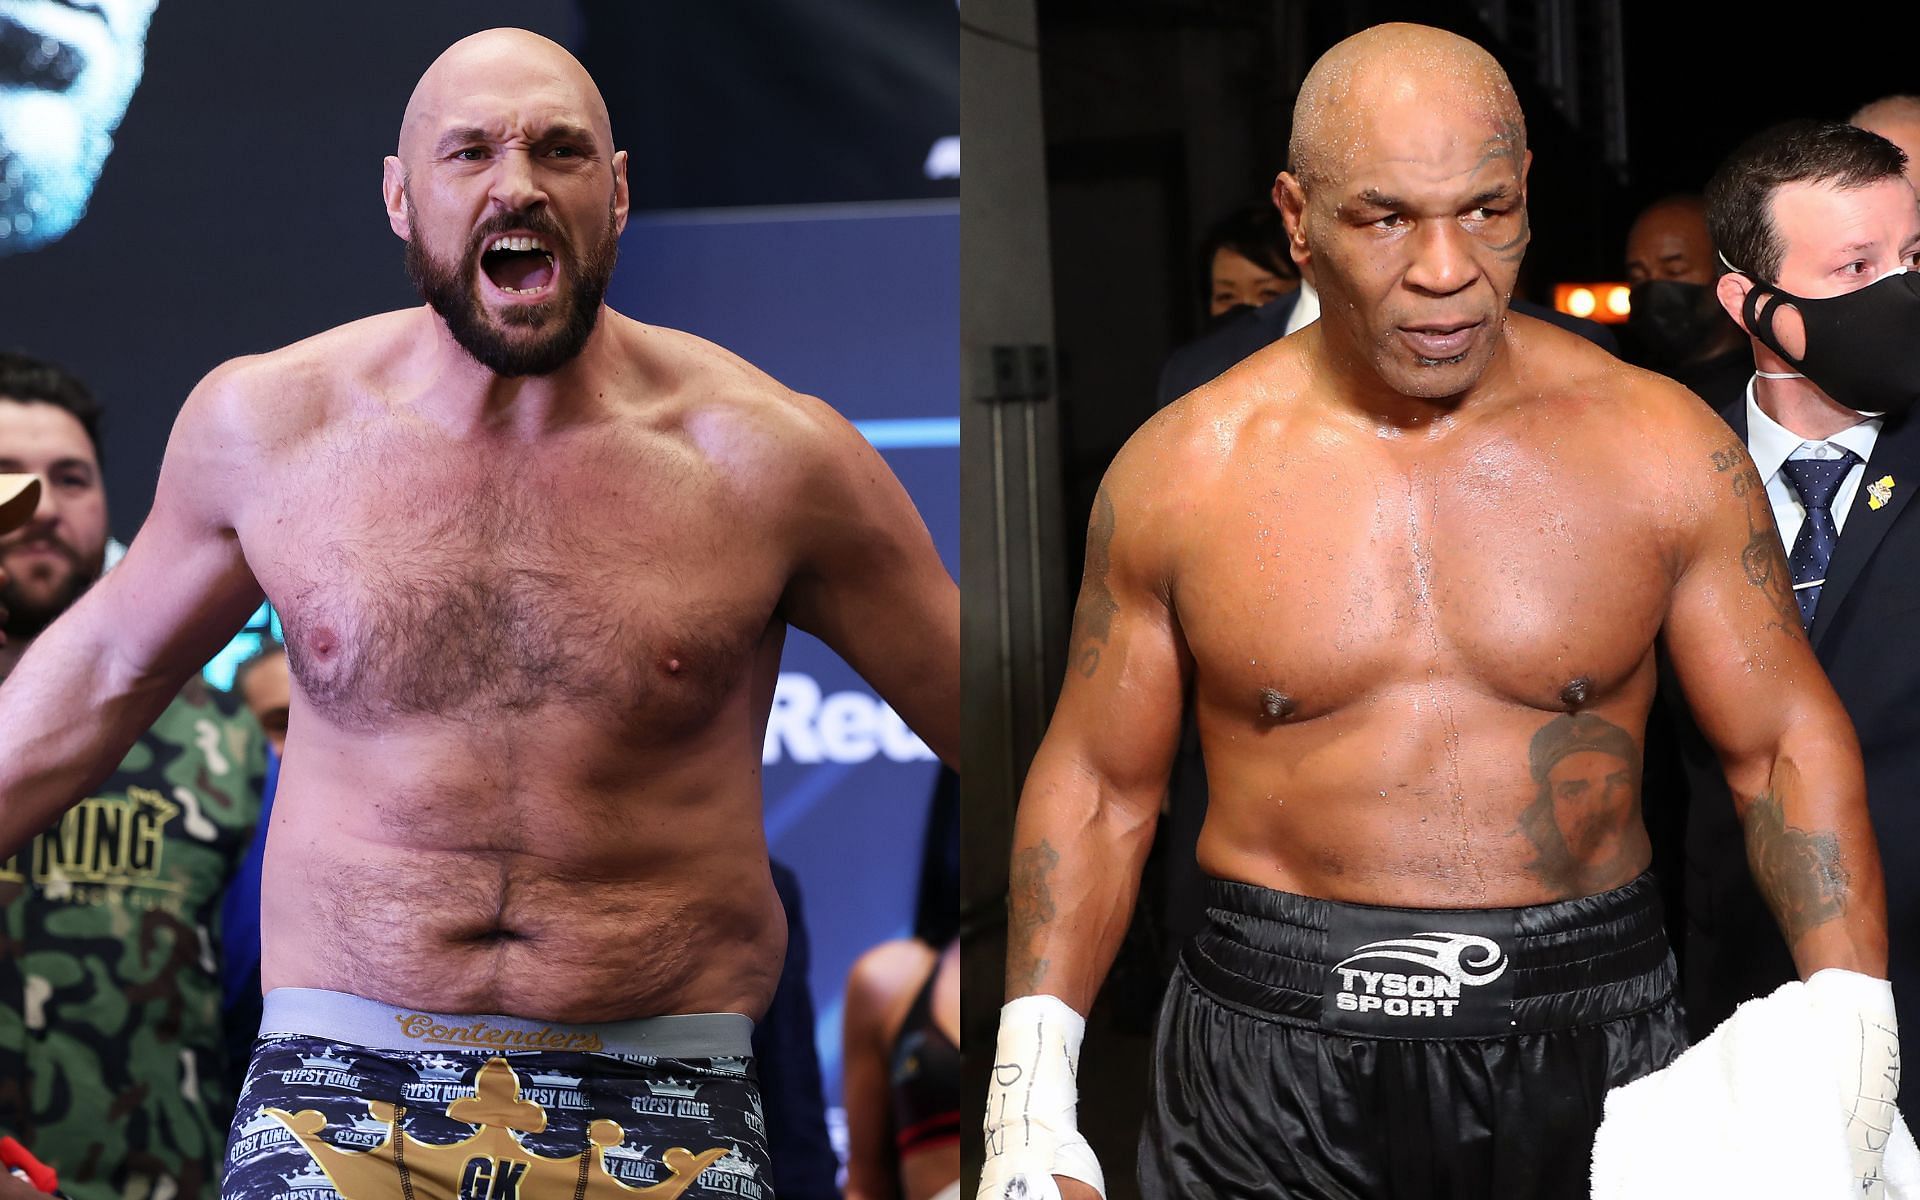 Tyson Fury (left) and Mike Tyson (right) are beheld as bona fide icons in the combat sports world [Images courtesy: Getty Images]